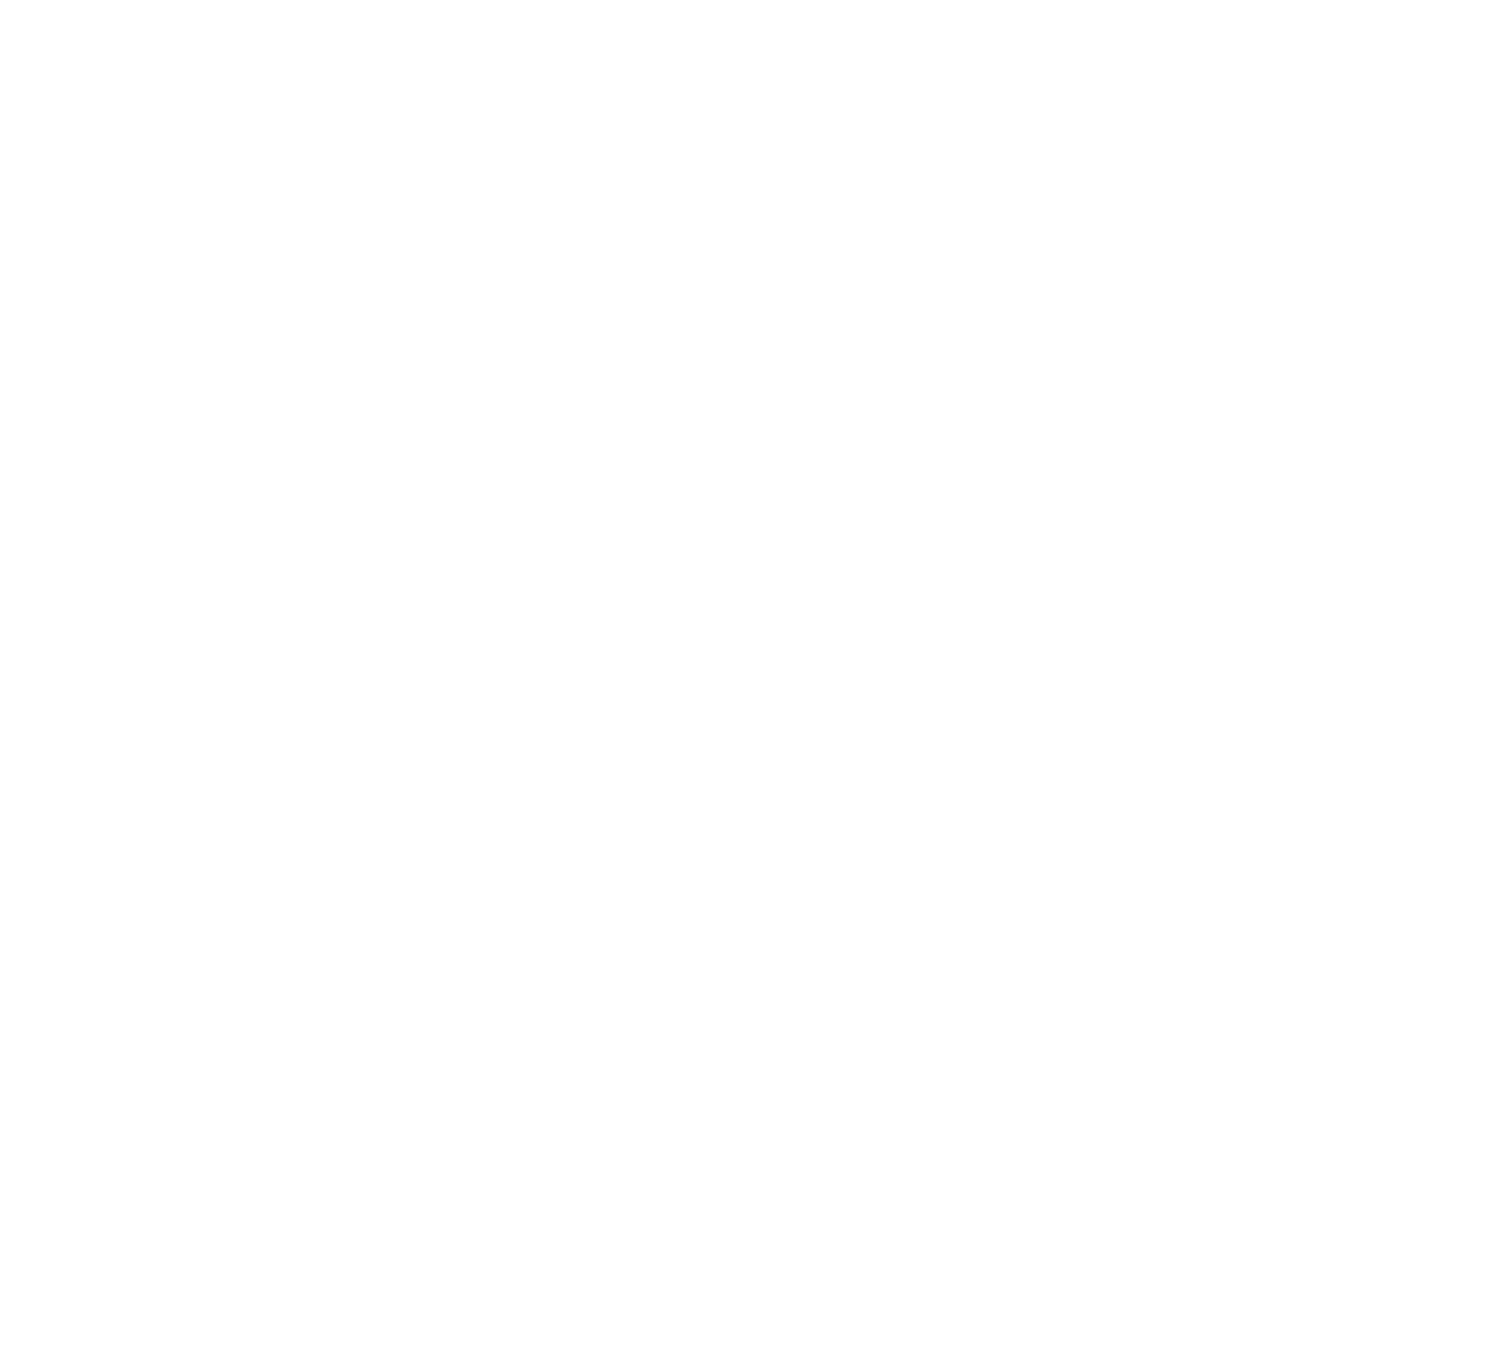 Humans for Rights Network